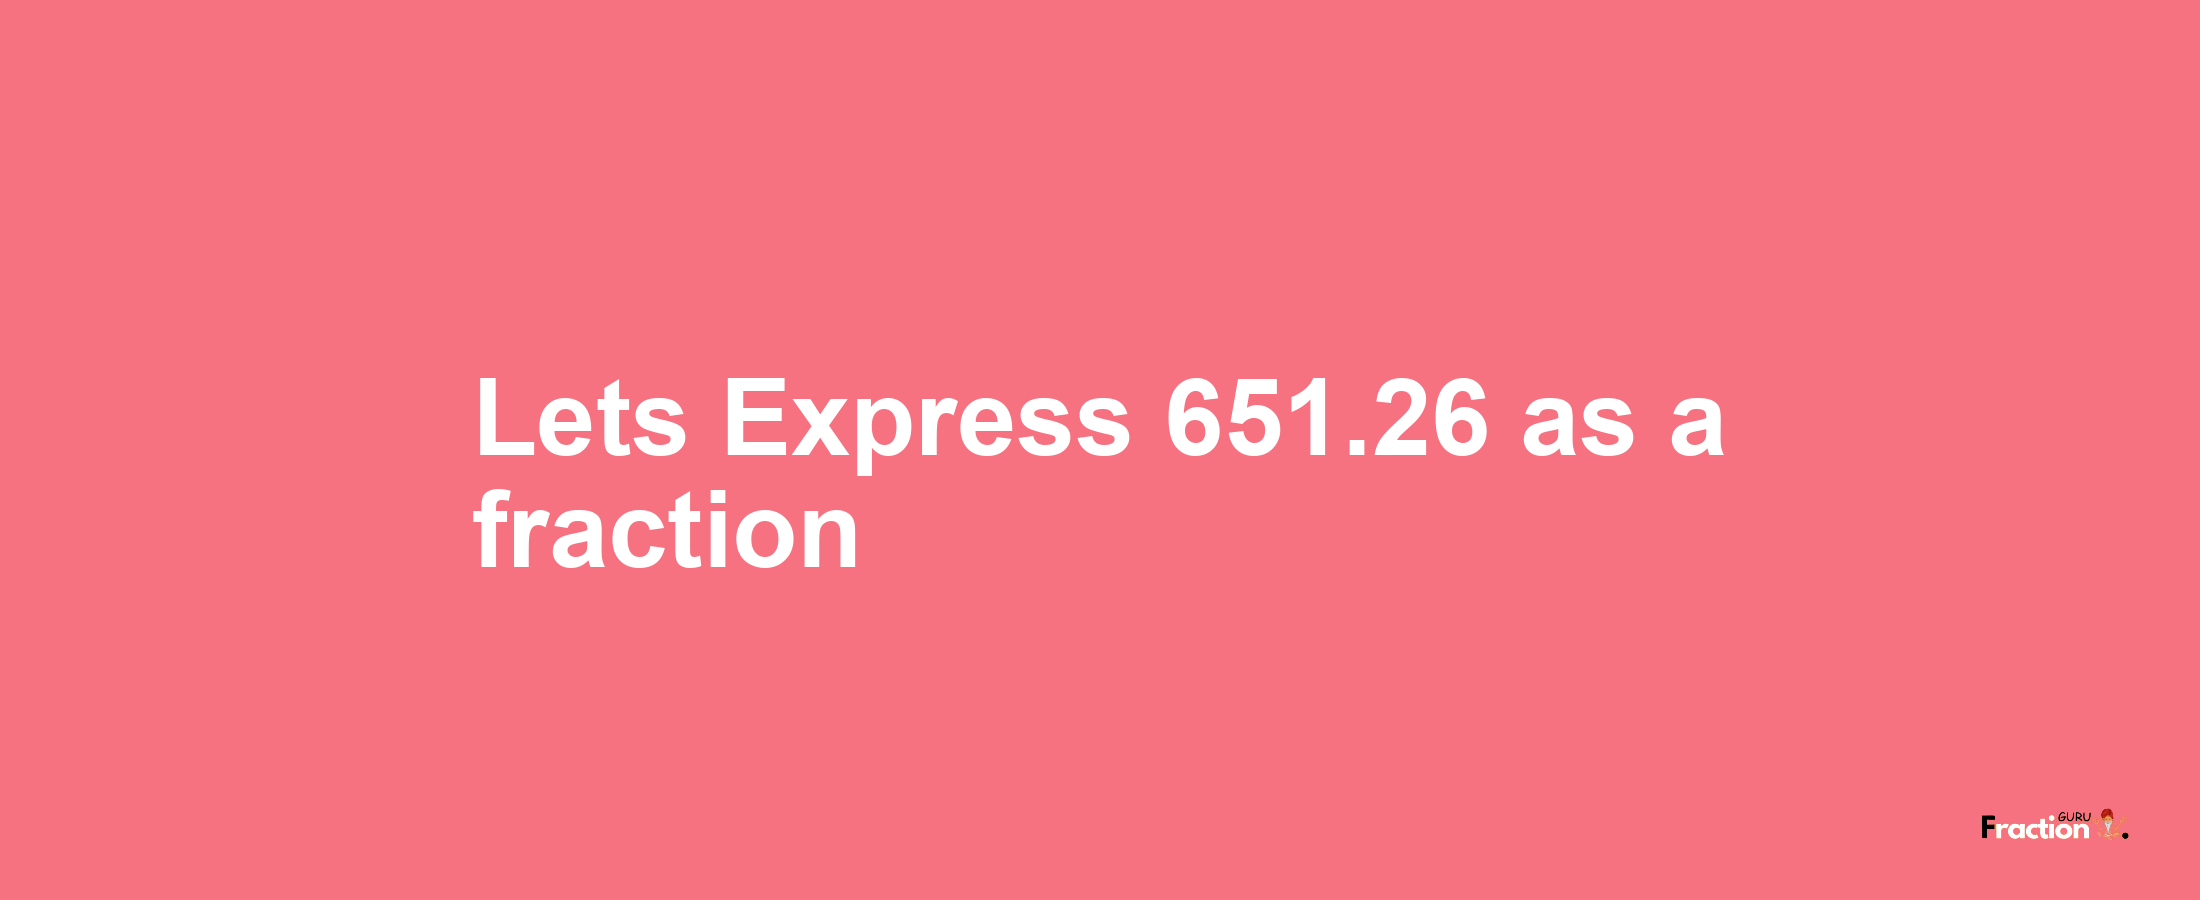 Lets Express 651.26 as afraction